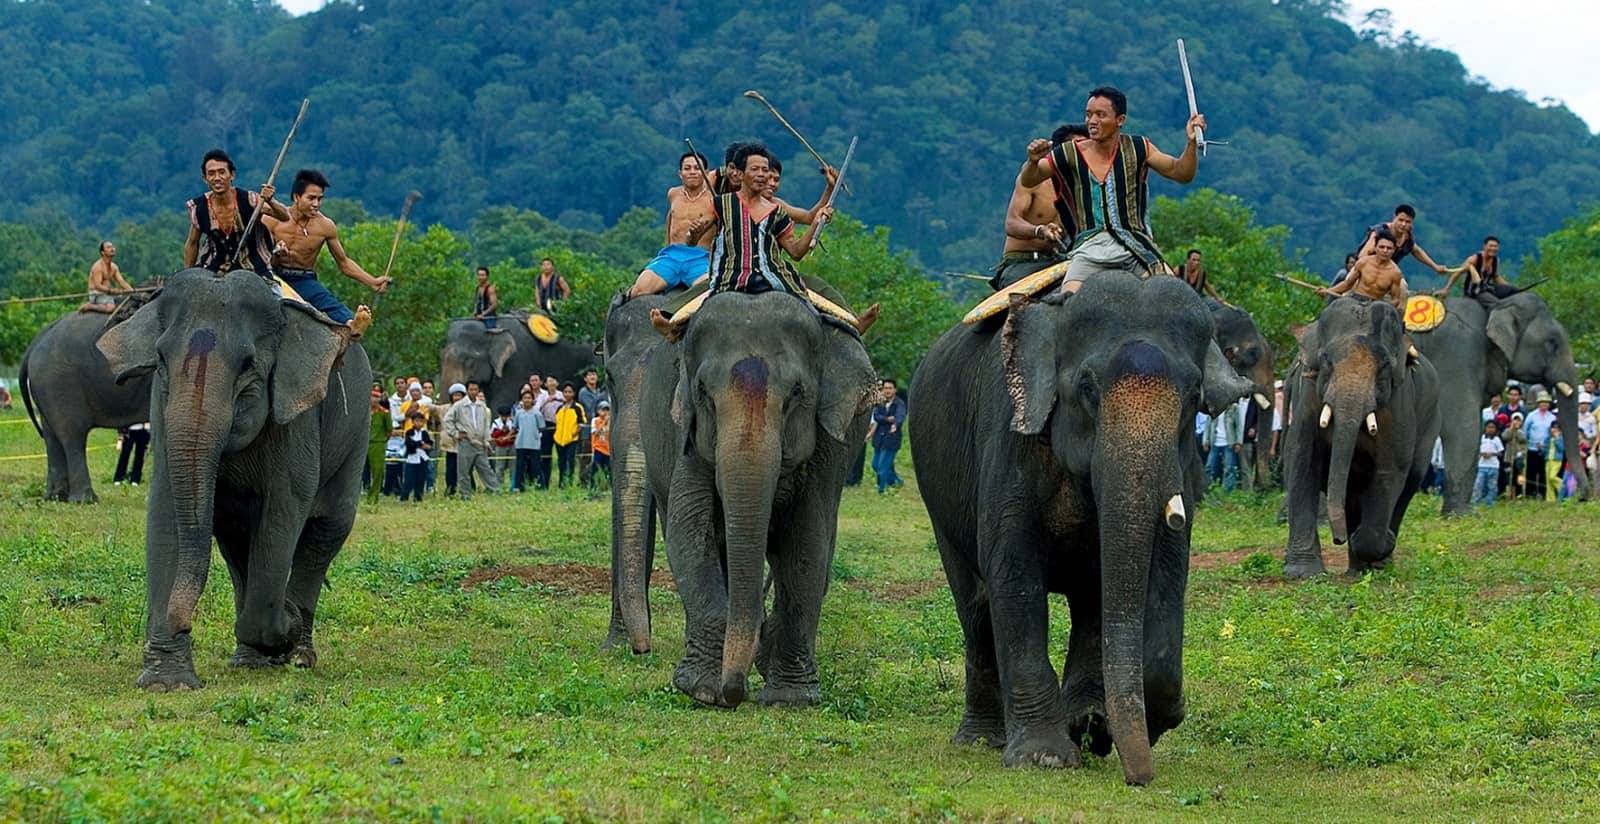 Buon Don Elephant Races - Tour Packages and Vacation | AOJourneys